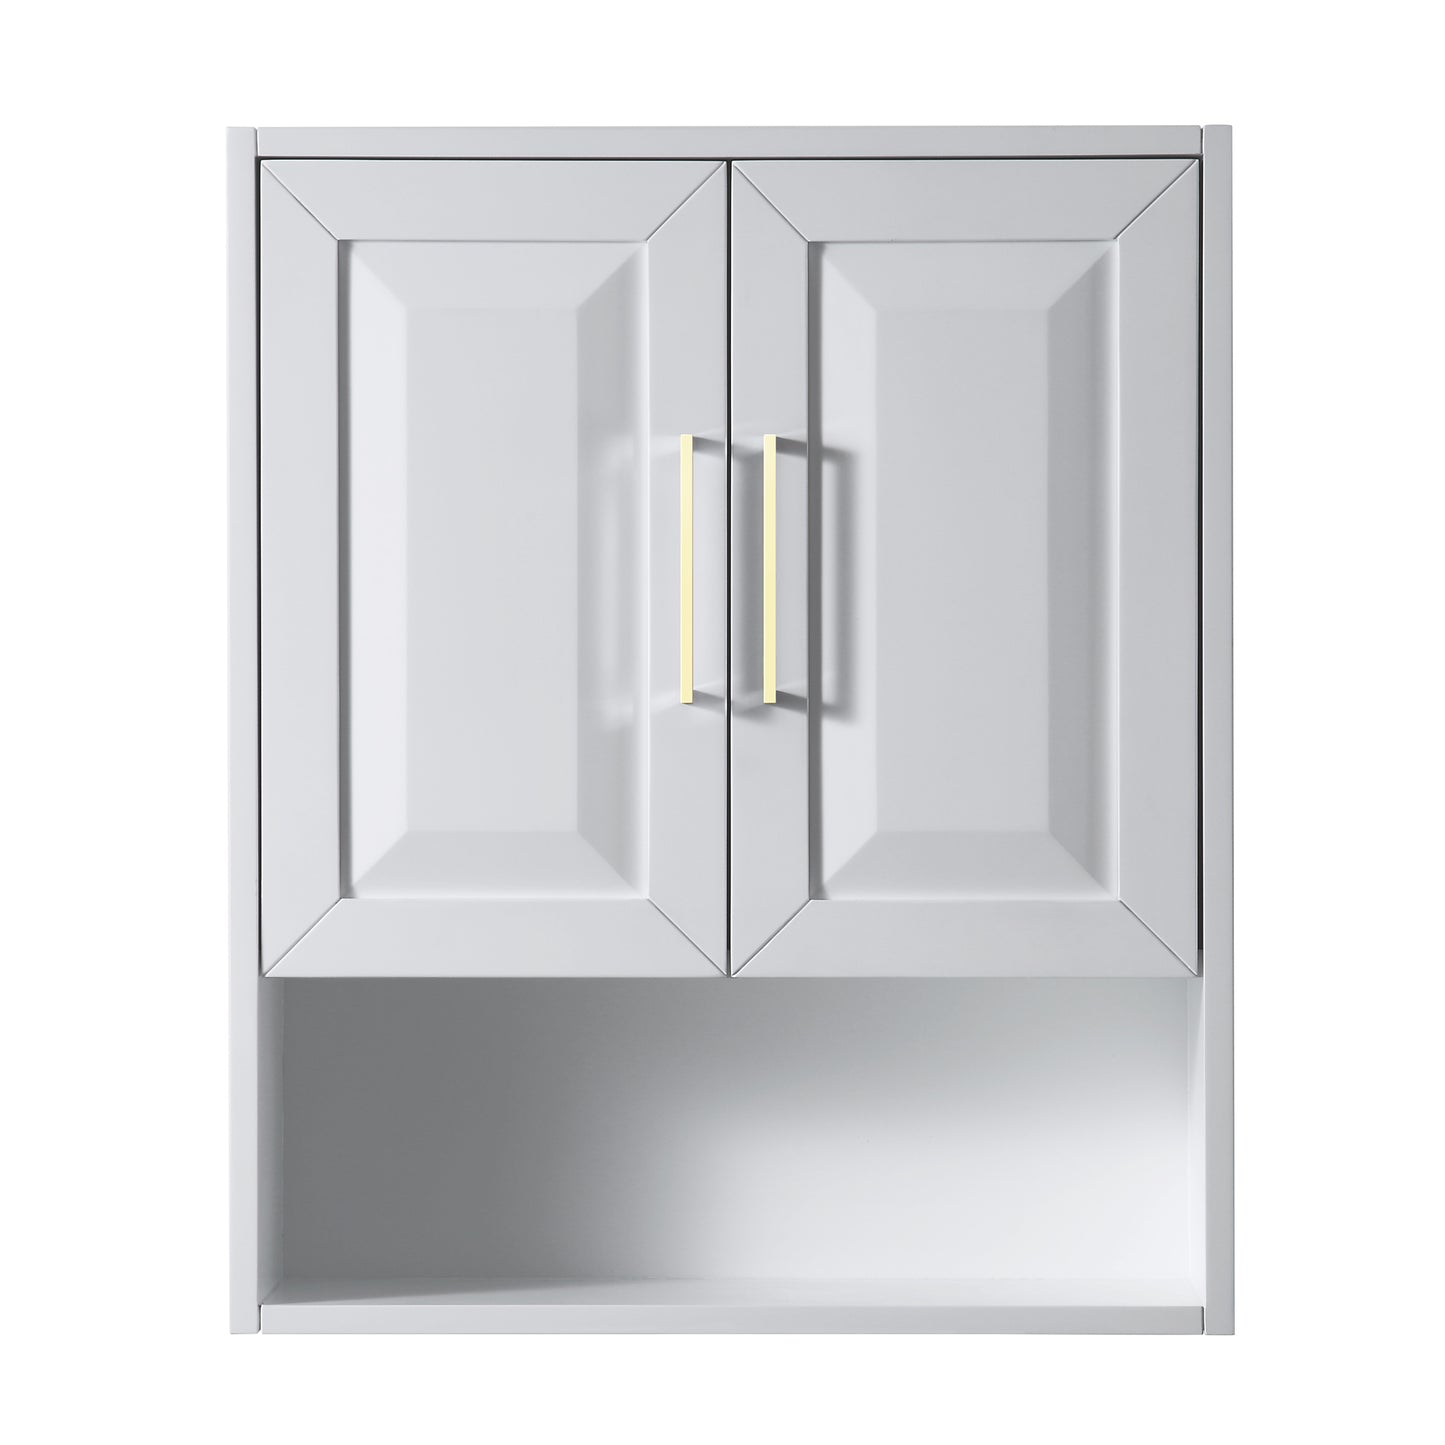 Wyndham Daria Over-the-Toilet Bathroom Wall-Mounted Storage Cabinet in White with Brushed Gold Trim - Luxe Bathroom Vanities